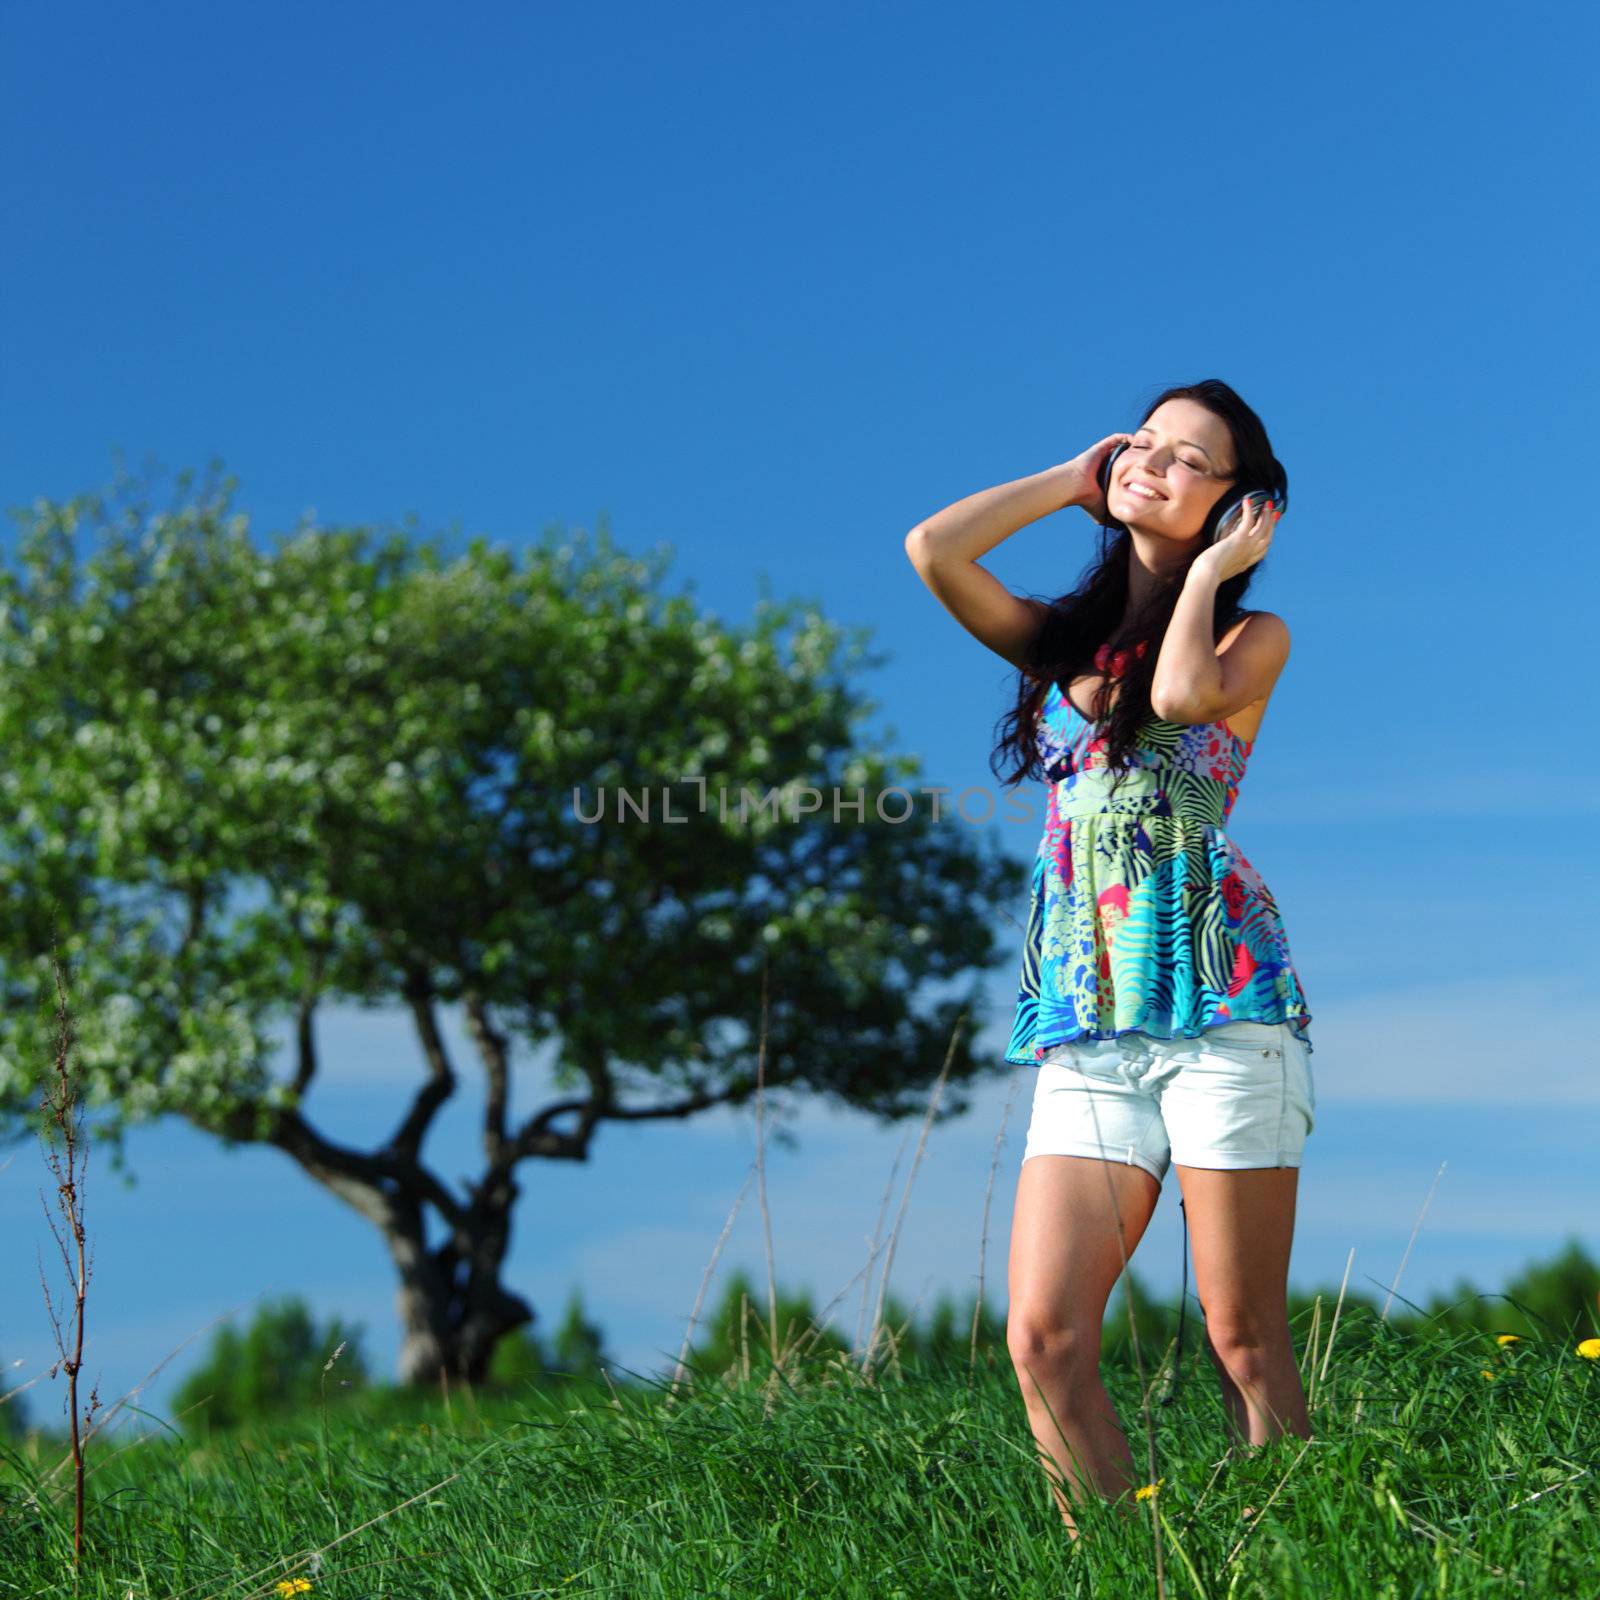 Young woman with headphones listening to music on field